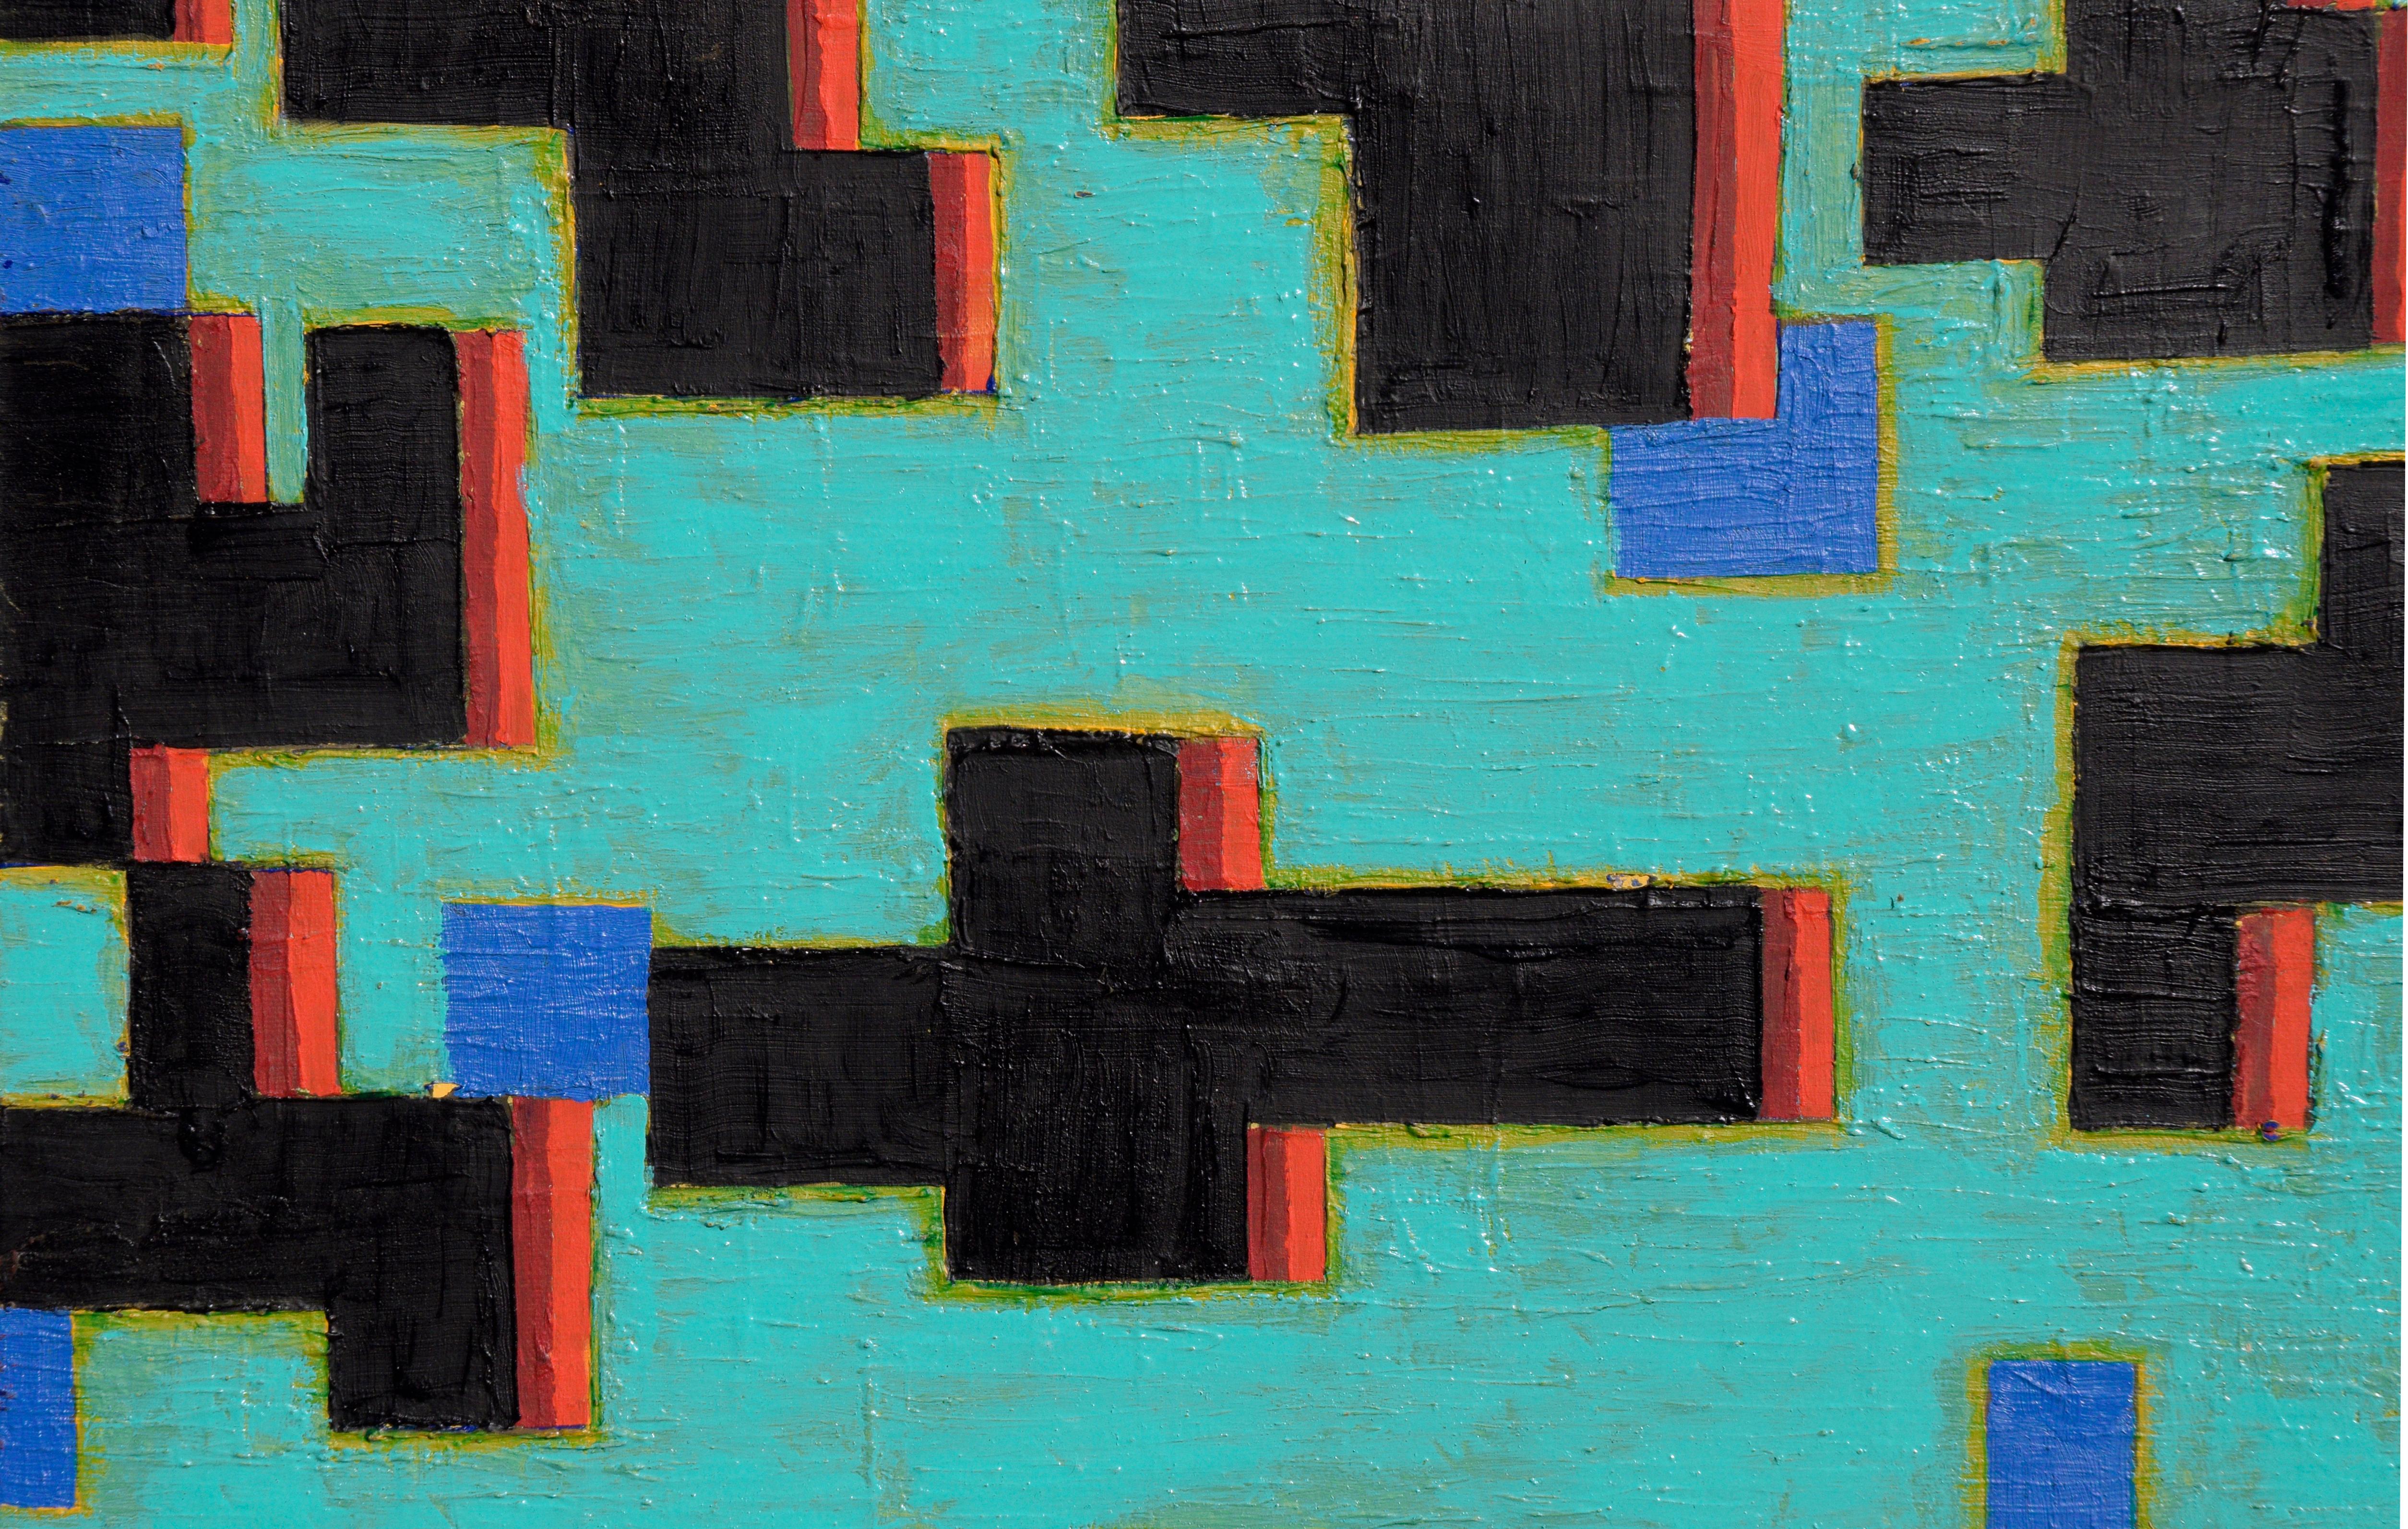 Contemporary Two-Part Geometric Abstract: Teal and Monochrome - Painting by Michael Pauker 